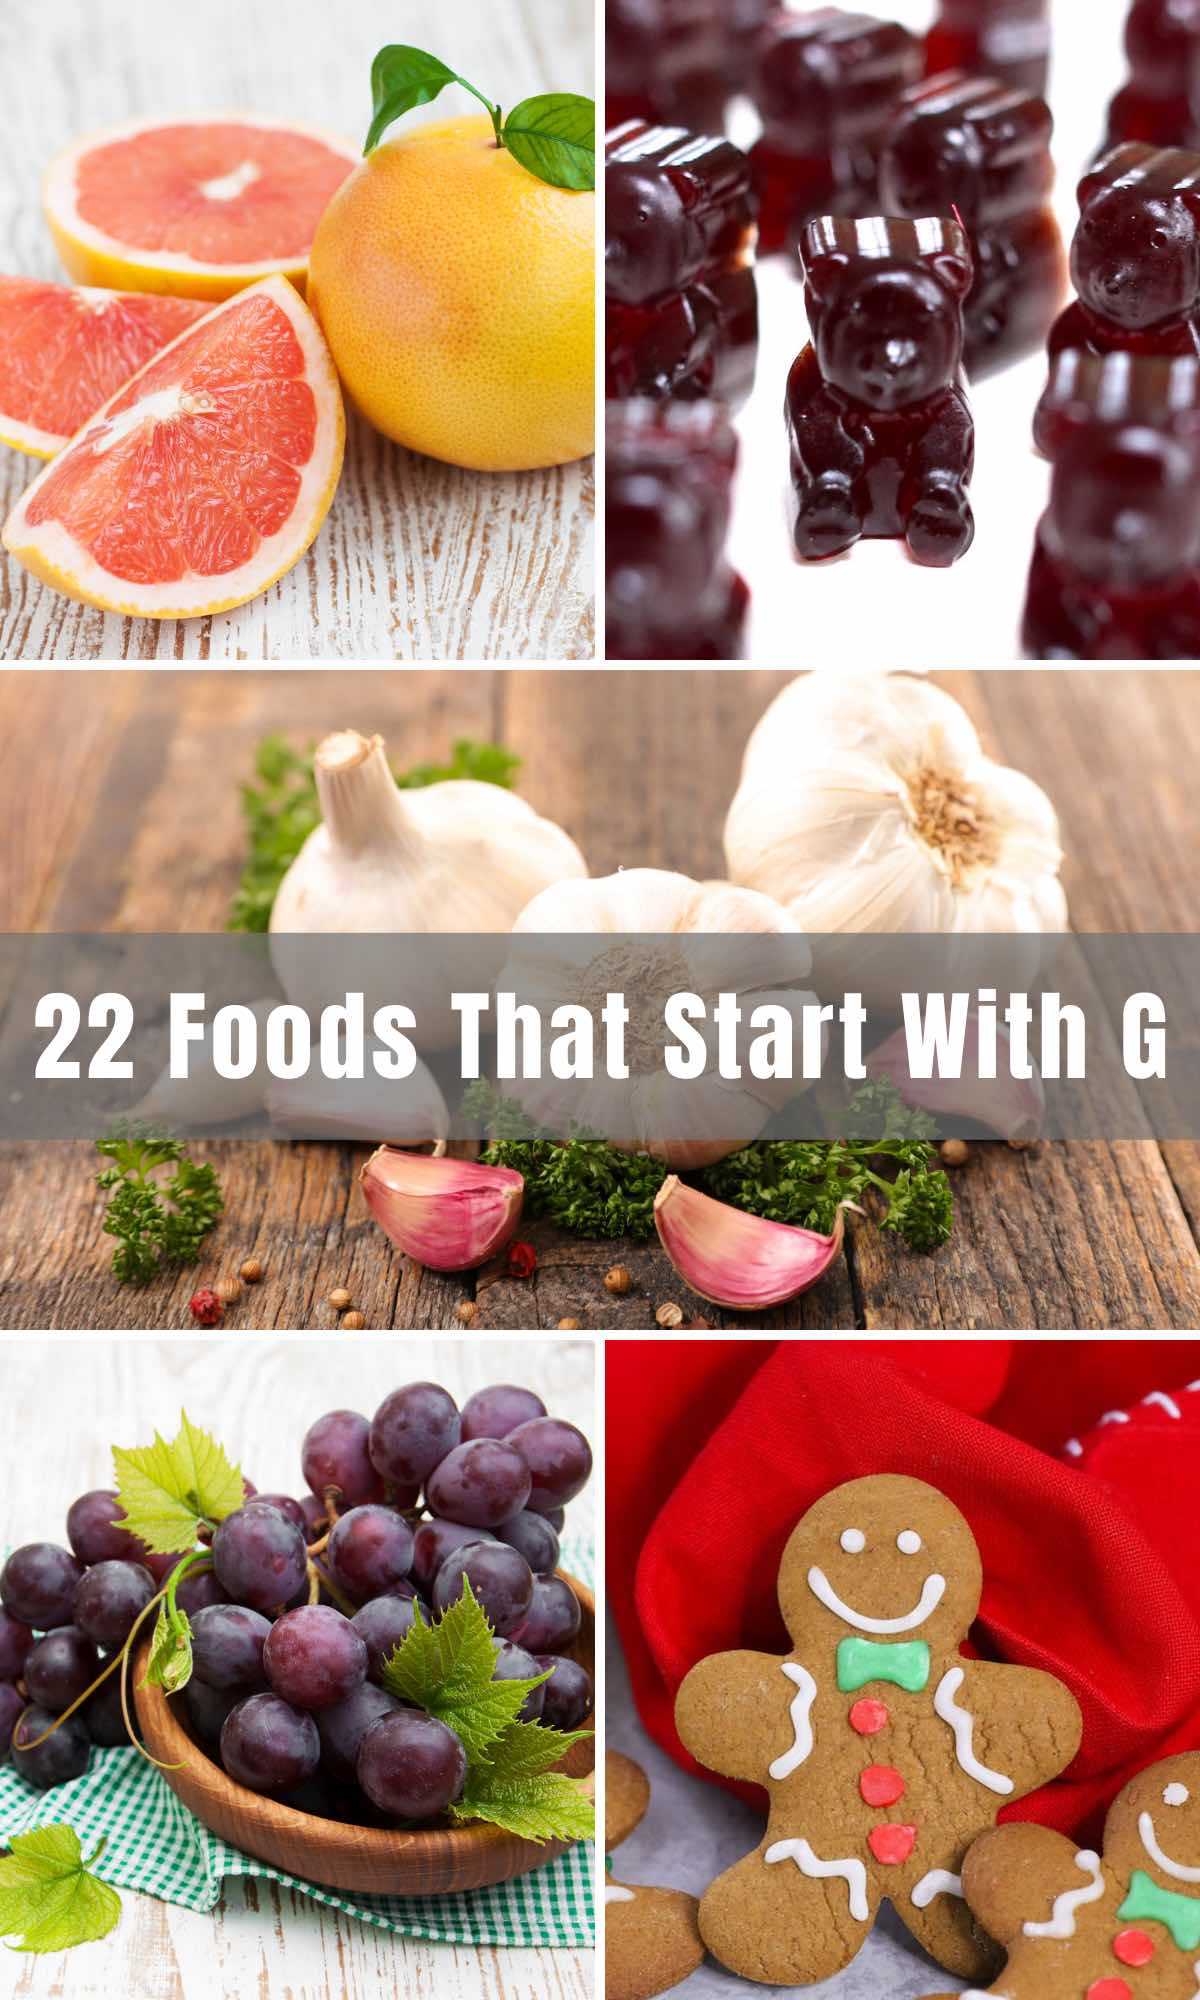 Foods That Start With G (Fruits, Vegetables, Breakfast, Snacks and More)